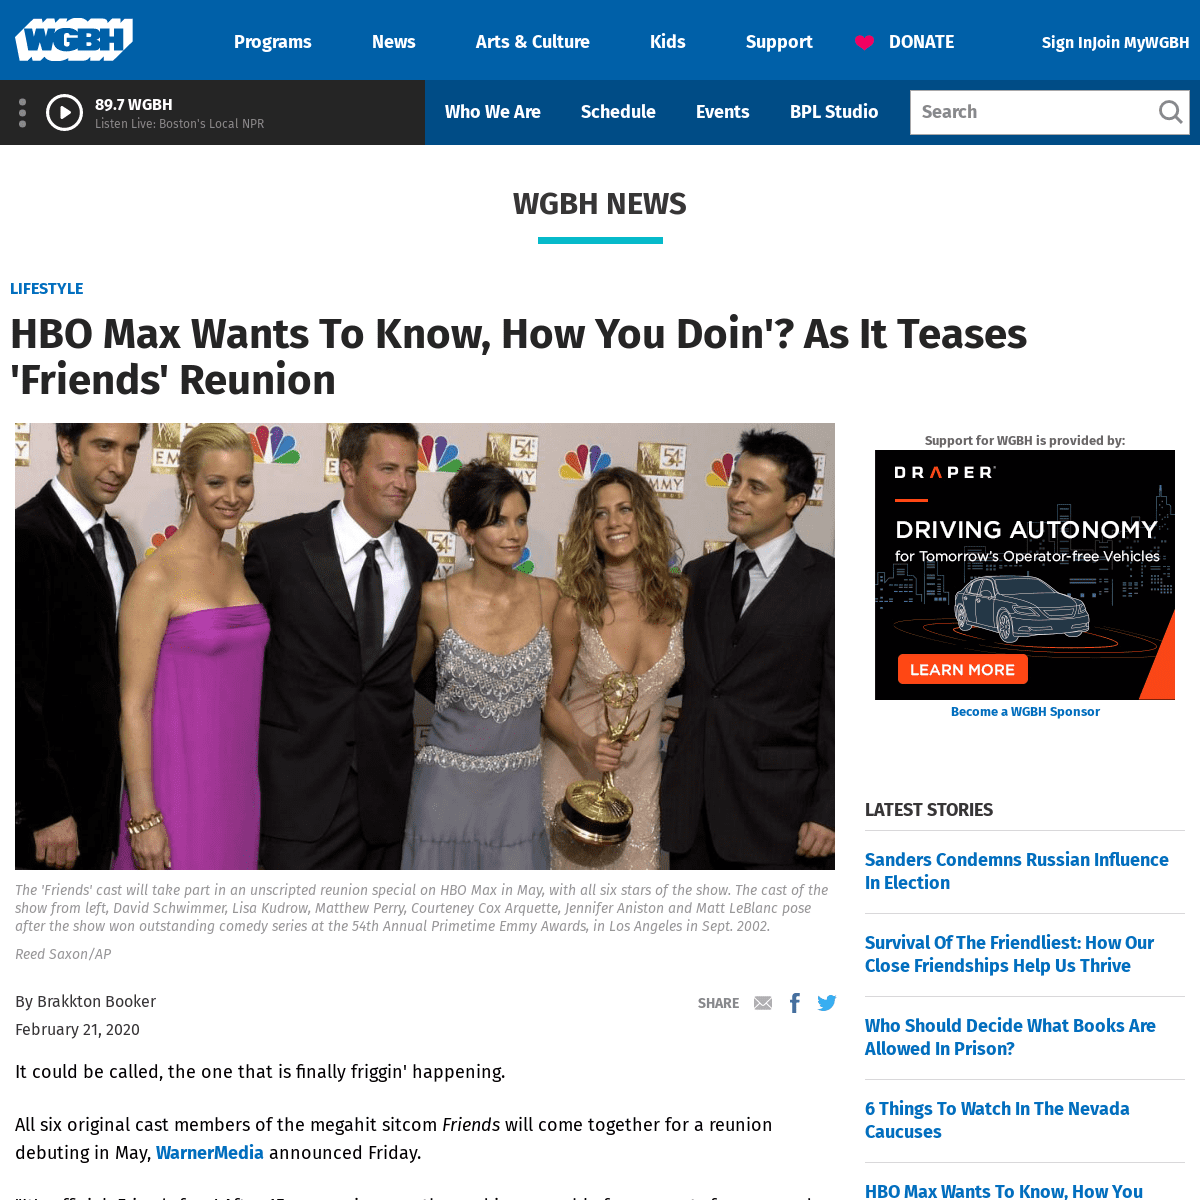 A complete backup of www.wgbh.org/news/lifestyle/2020/02/22/hbo-max-wants-to-know-how-you-doin-as-it-teases-friends-reunion